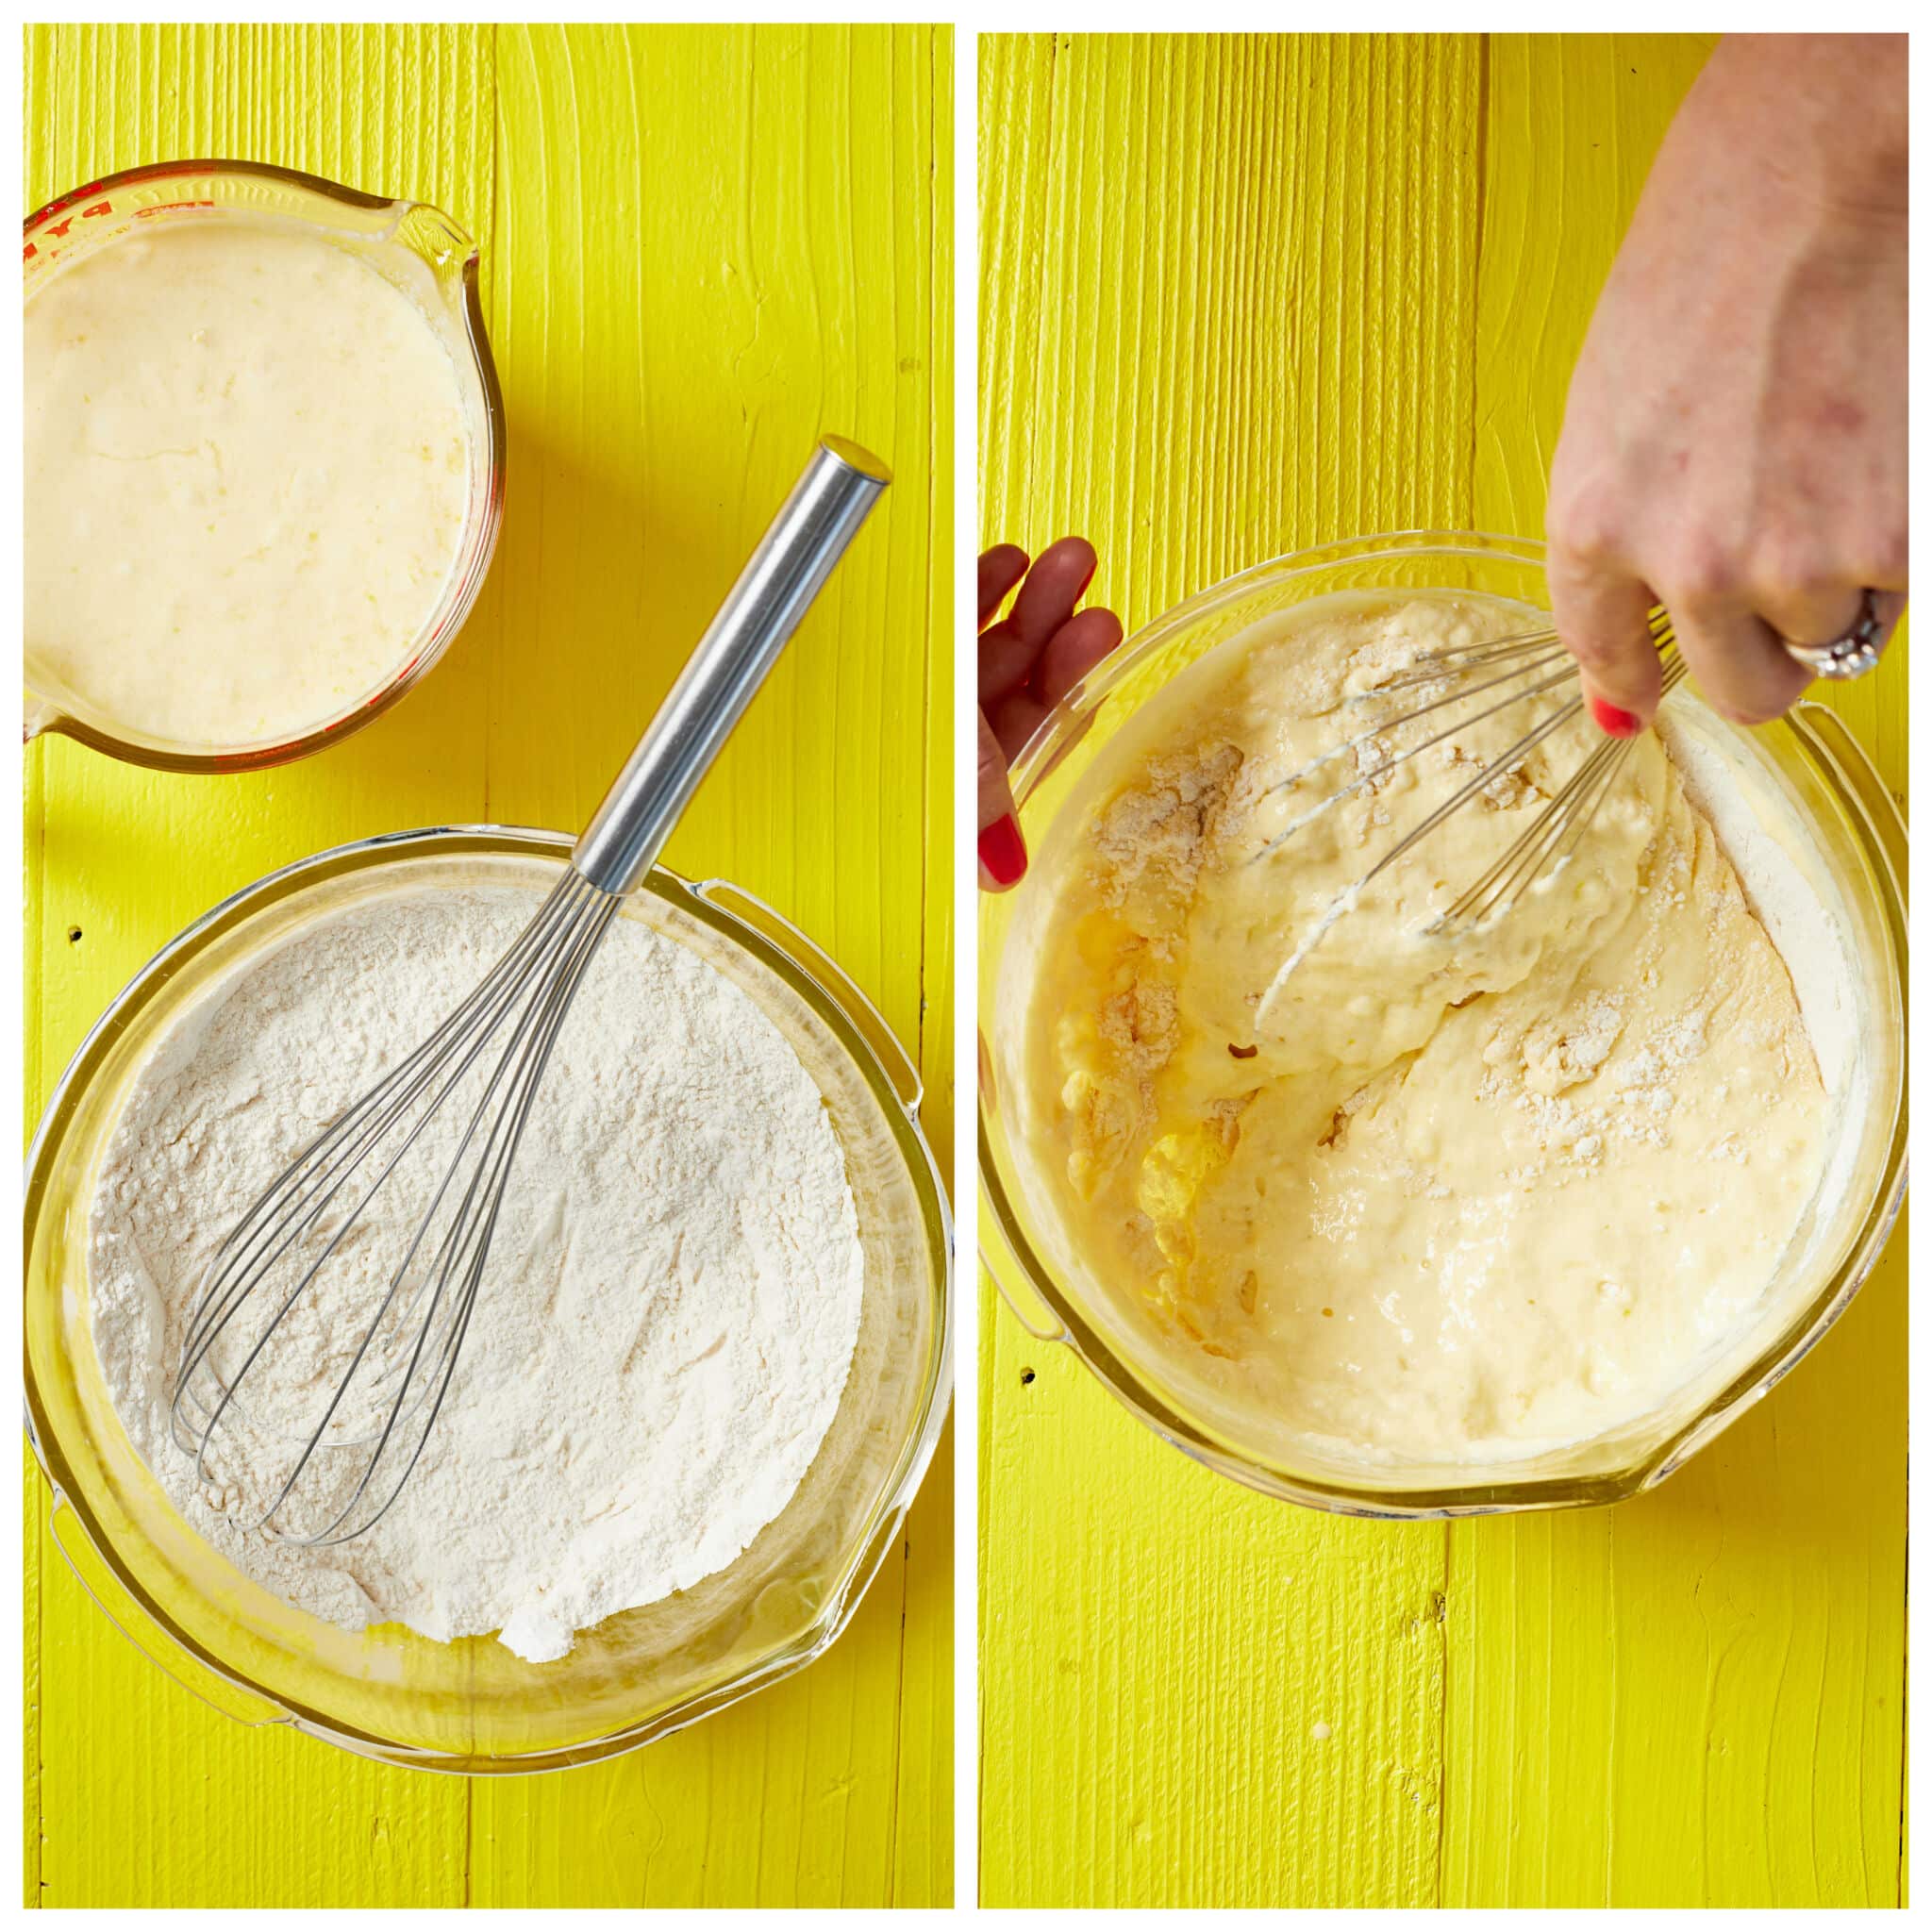 Instructions on how to make ricotta pancake batter. The dry ingredients and wet ingredients are prepared separately on the left side. Whisking together wet ingredients and dry ingredients gently together on the right side.